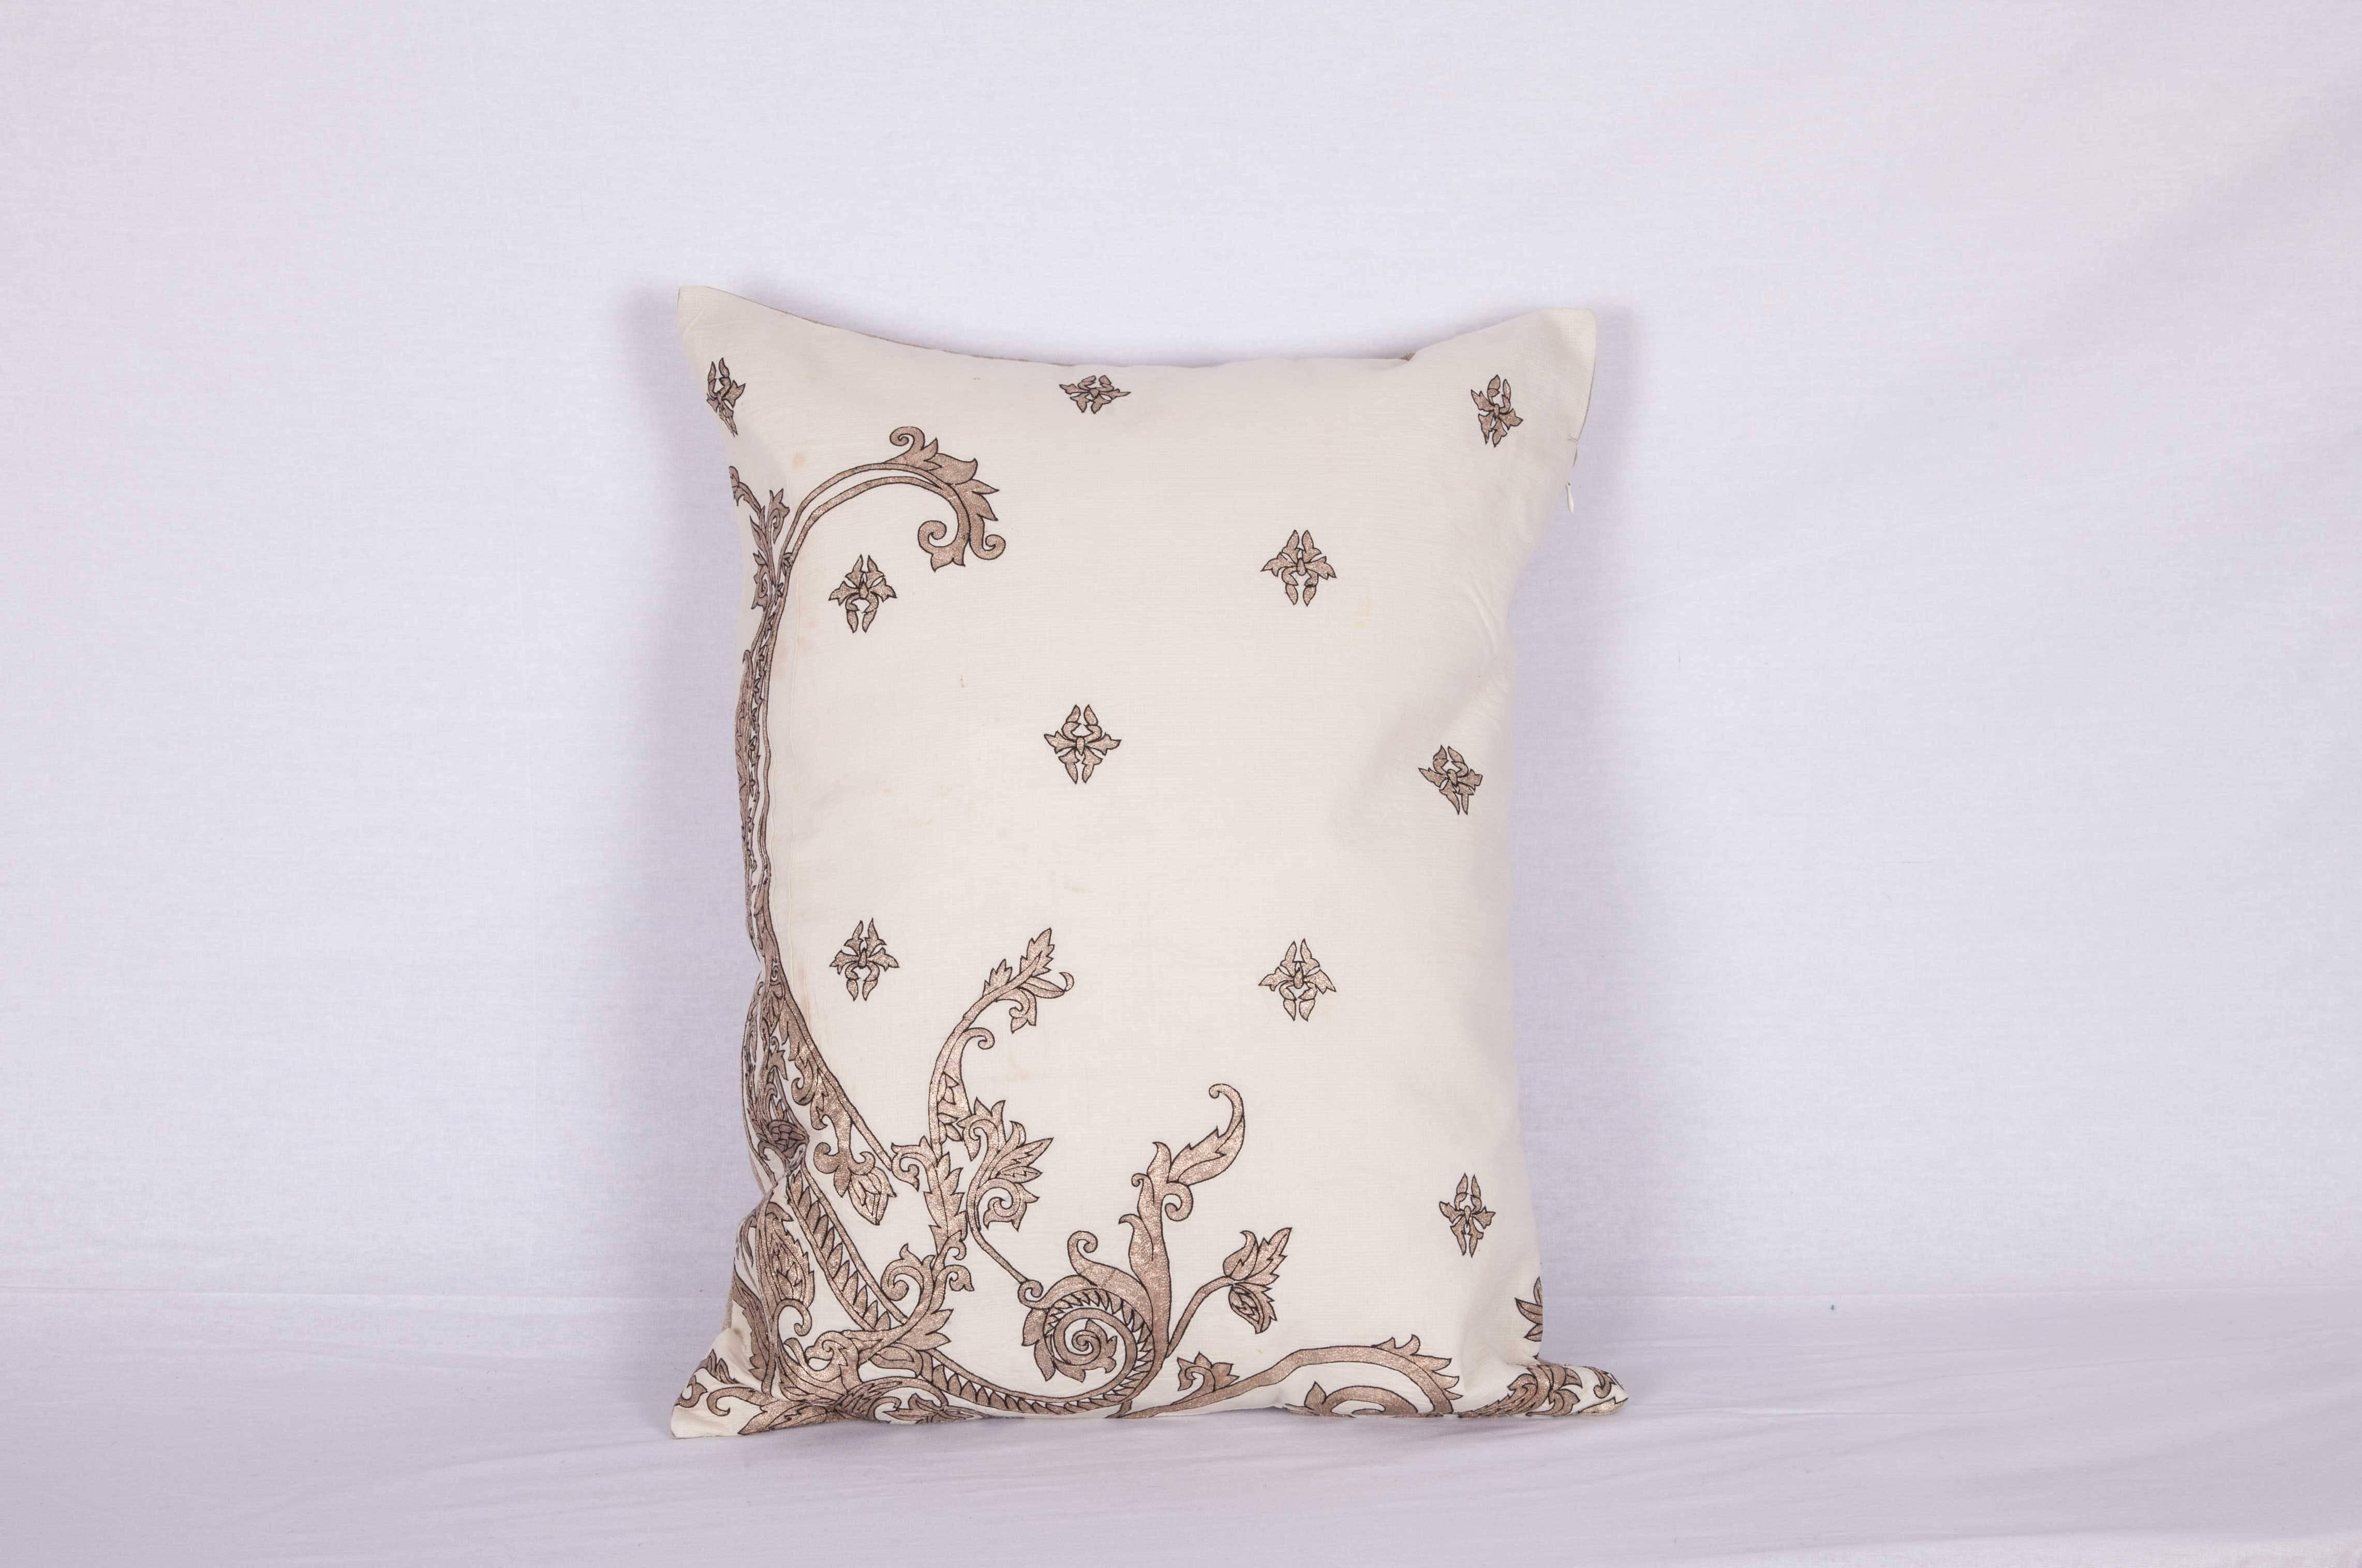 The pillow is made out of a 19th century or earlier European silver embroidery. It does not come with an insert but it comes with a bag made to the size and out of cotton to accommodate the filling. The backing is made of linen. Please note '